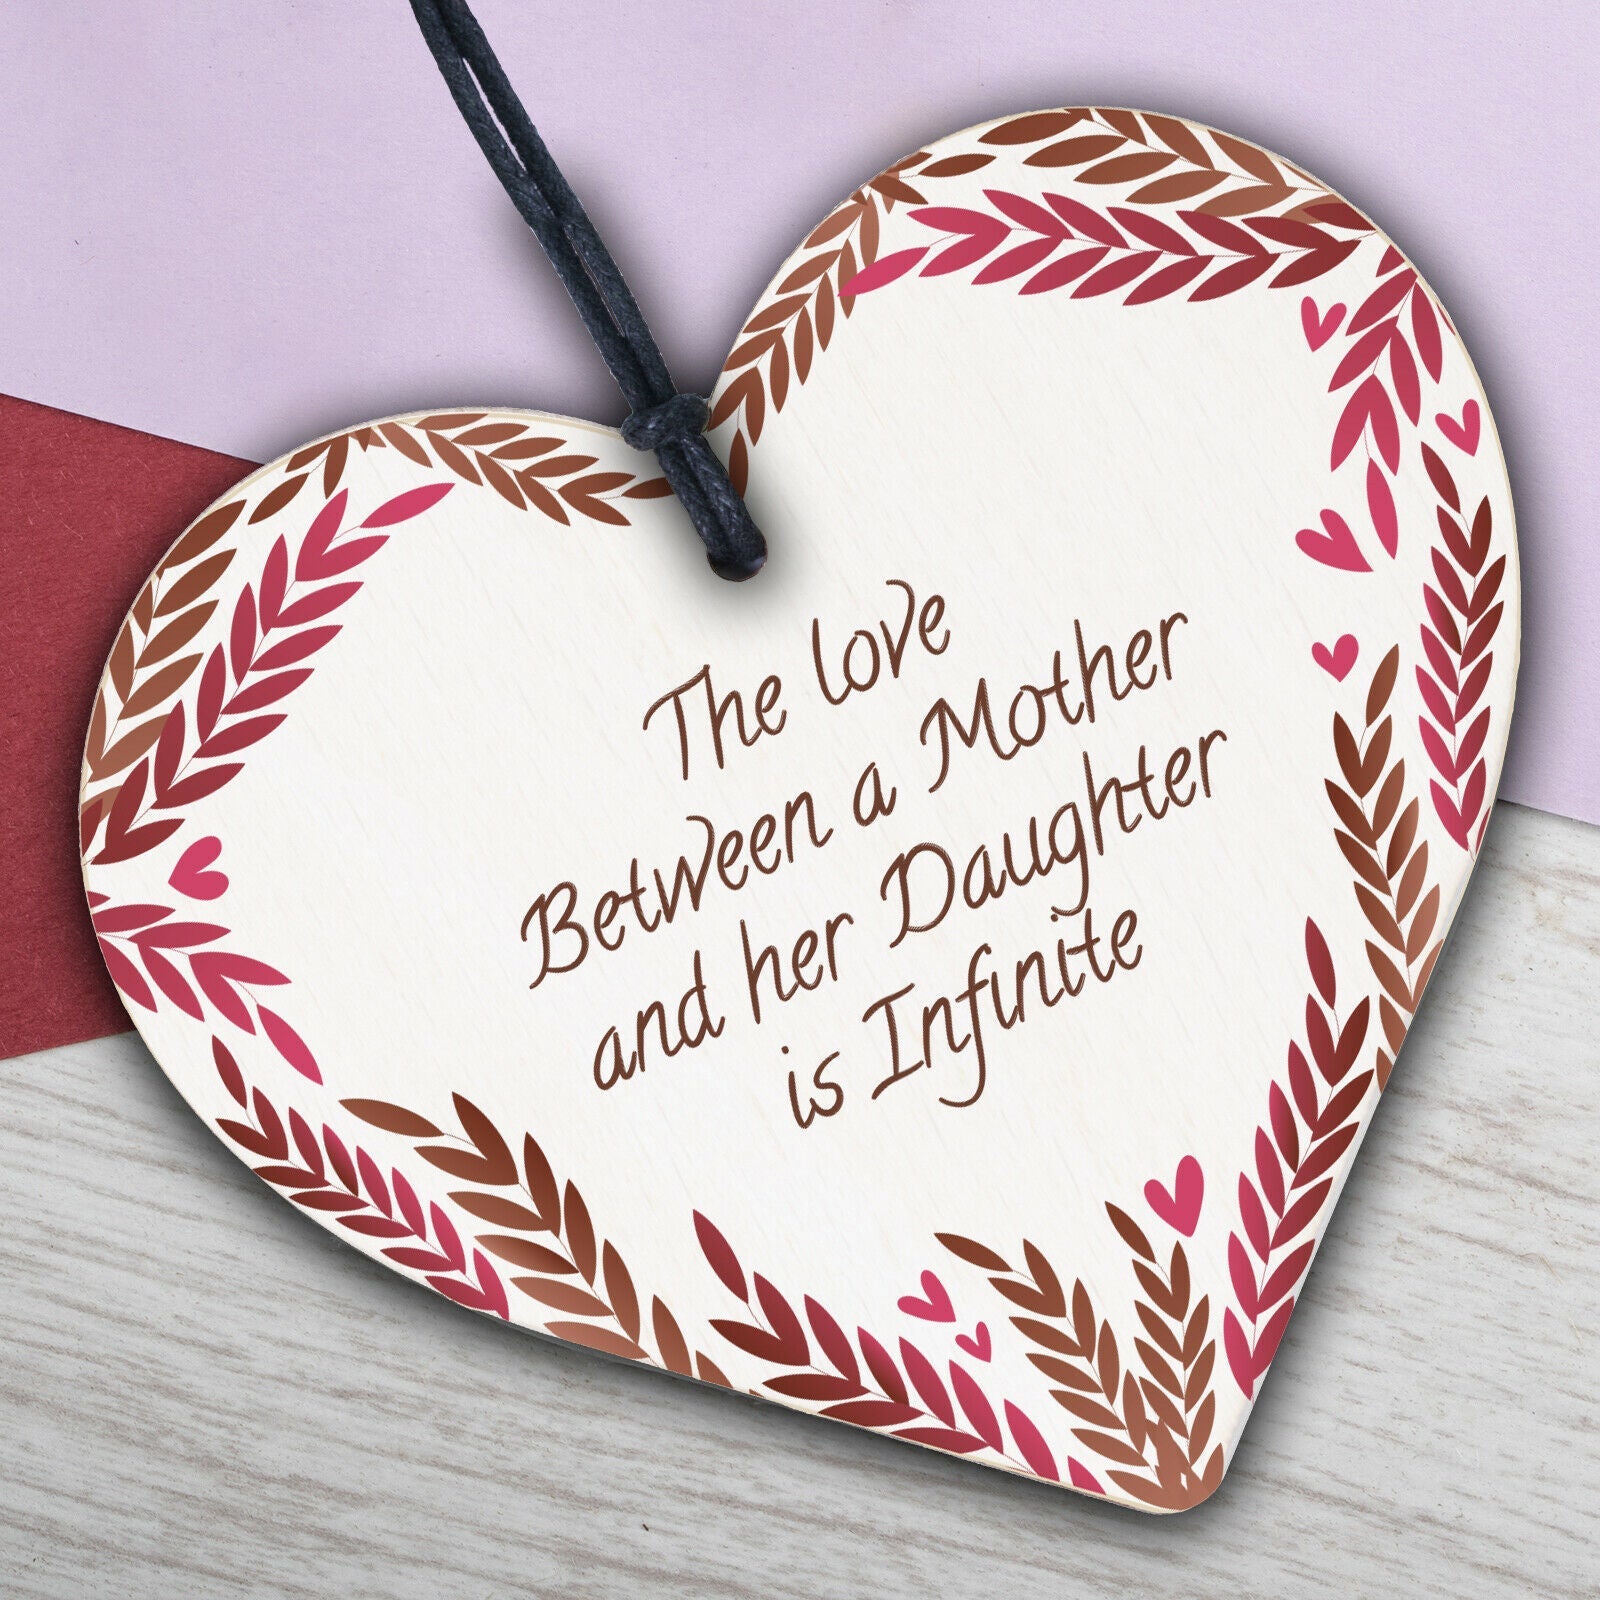 Mum Gifts Mothers Day Birthday Gifts From Daughter Wooden Heart Sign